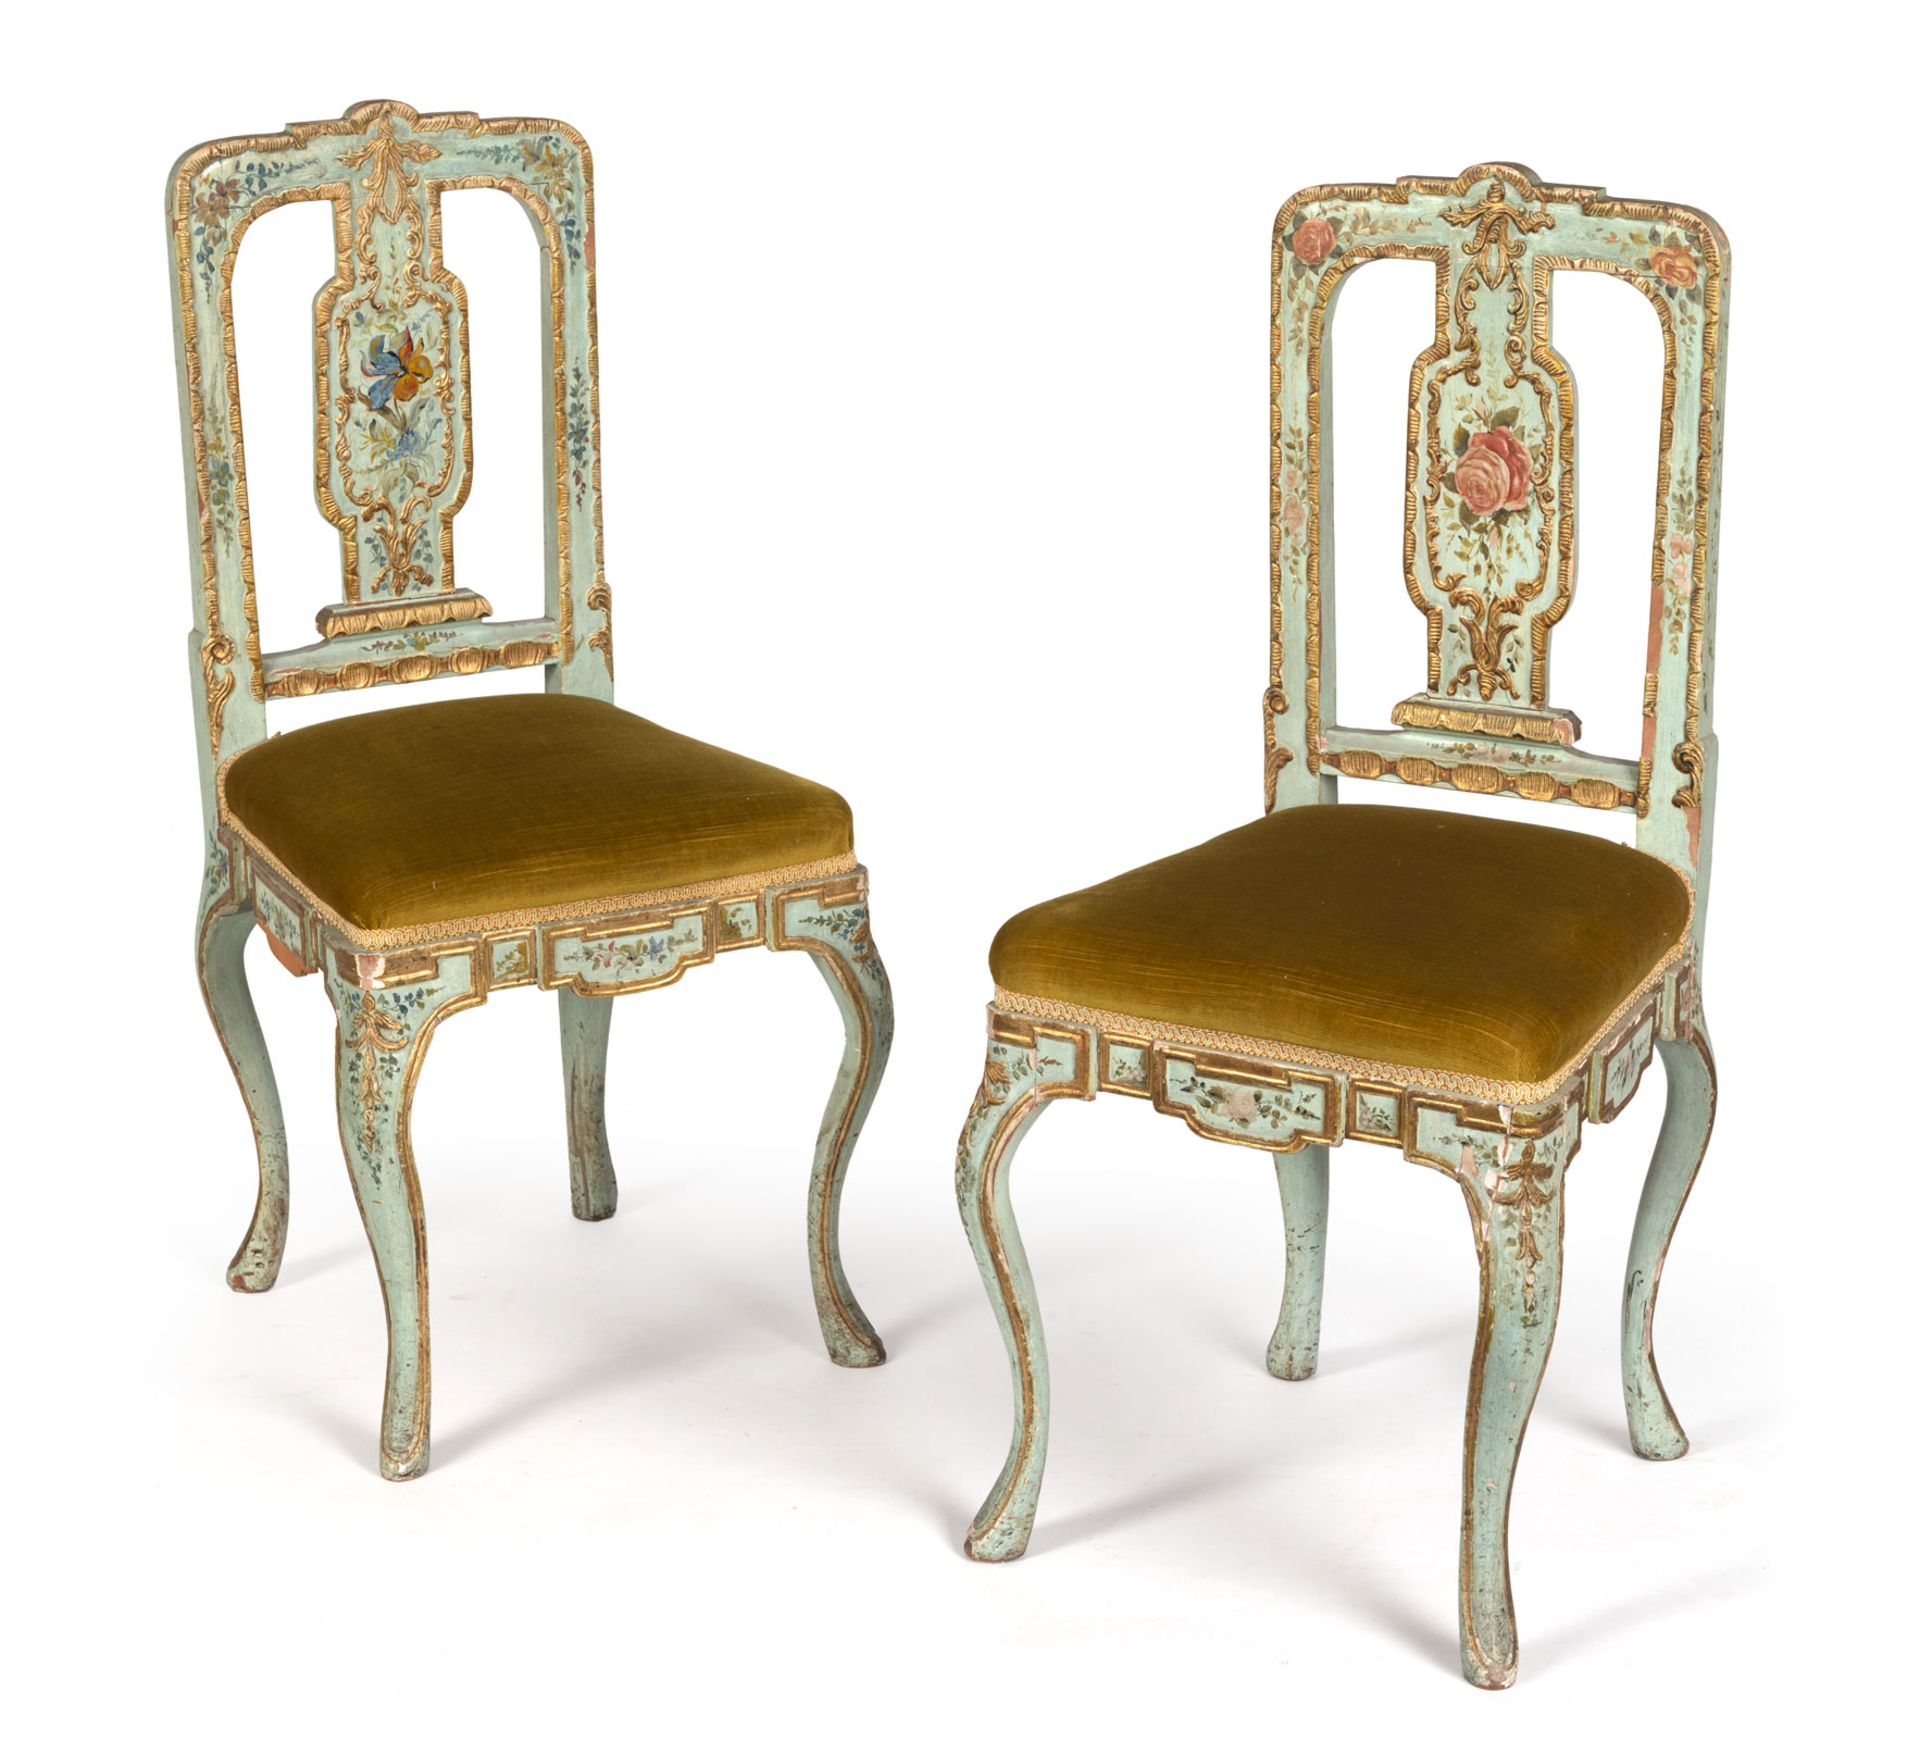 TWO POLYCHROME PAINTED SALON CHAIRS